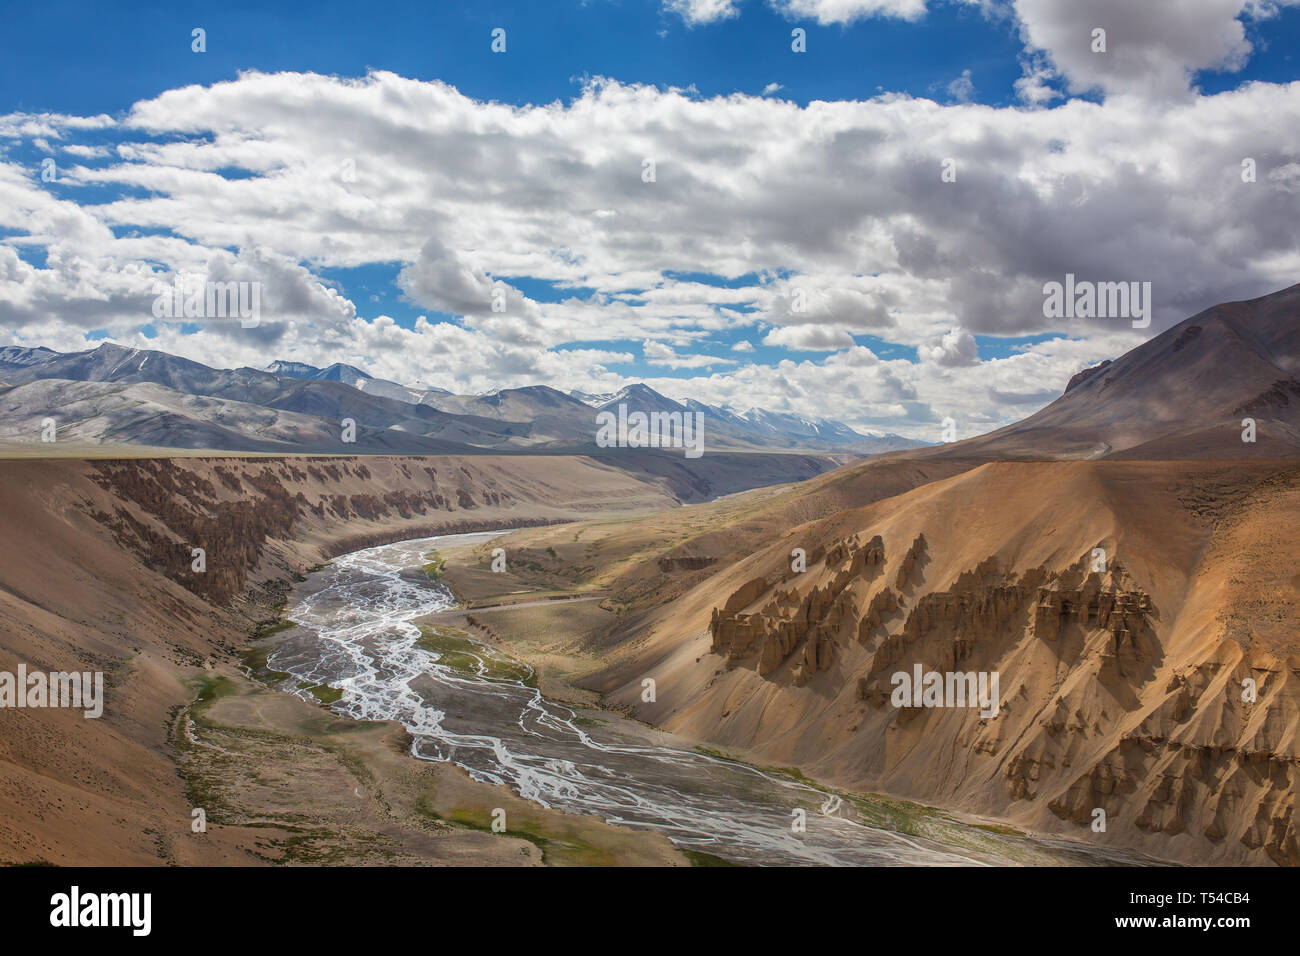 Beautiful mountain landscape in Ladakh. View from the Manali - Leh road in Ladakh, Jammu and Kashmir, India Stock Photo